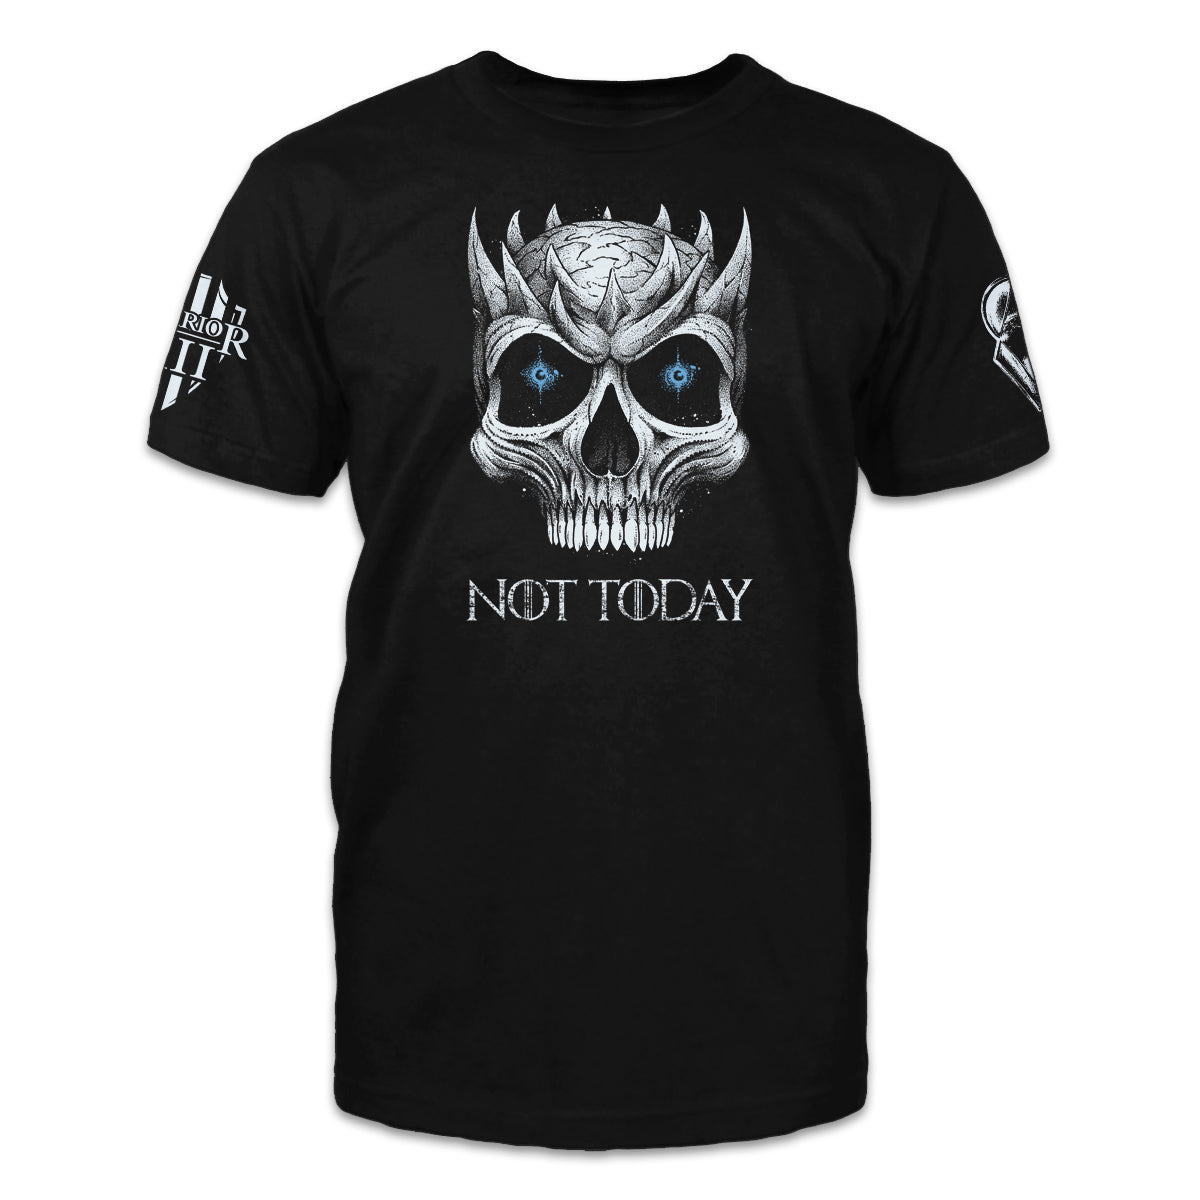 A black t-shirt with the words "Not today" printed on the front with a skull.